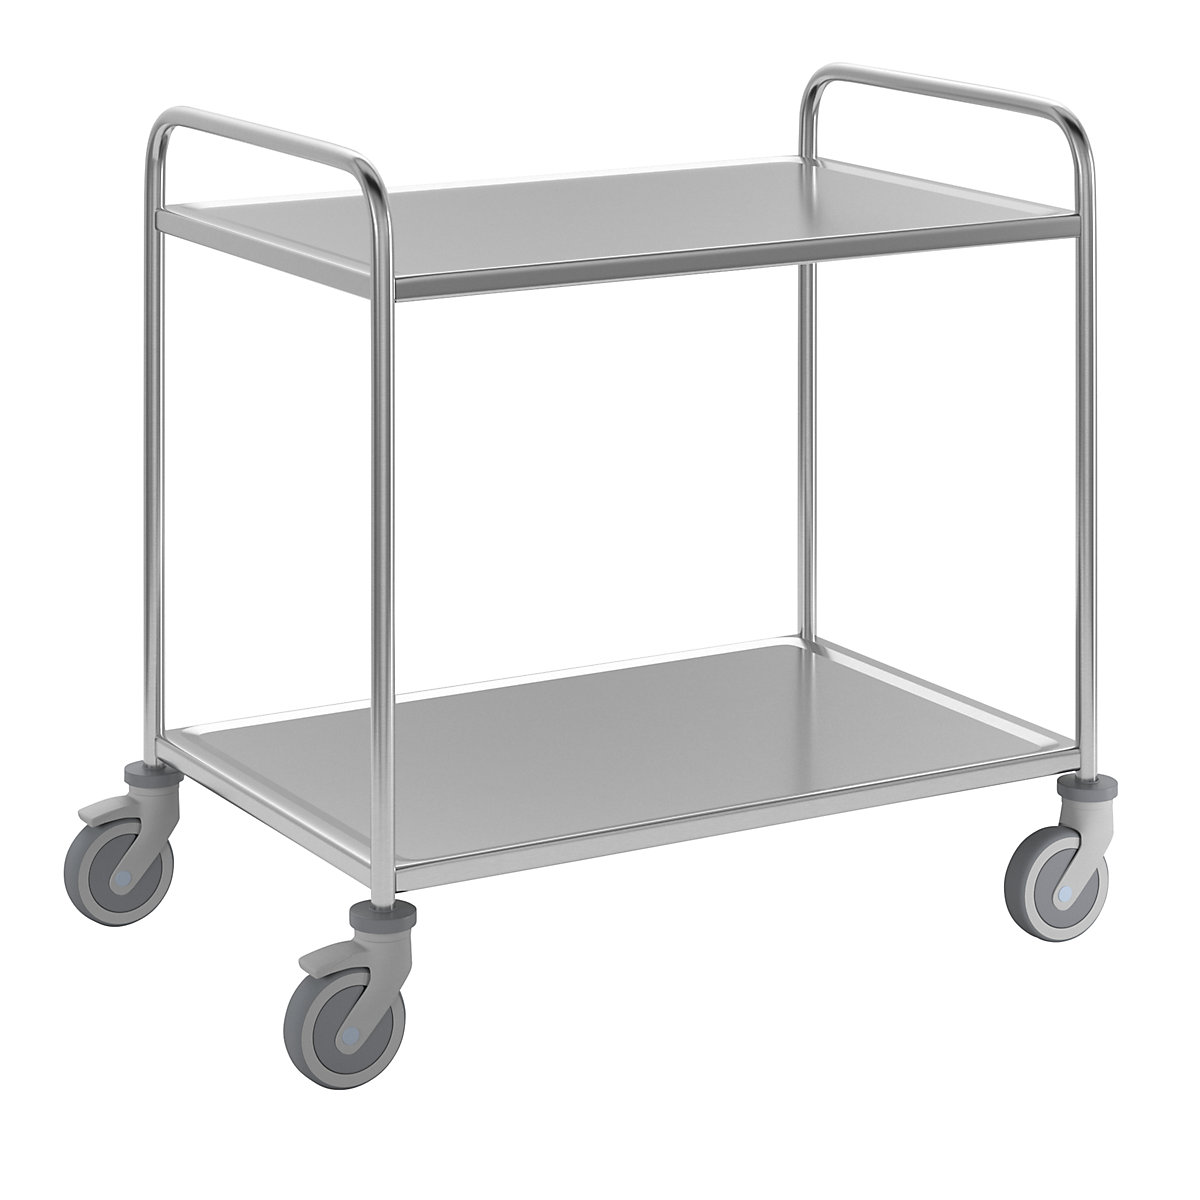 Stainless steel serving trolley, 2 shelves, thermoplastic rubber tyres, LxWxH 1070 x 670 x 970 mm-2